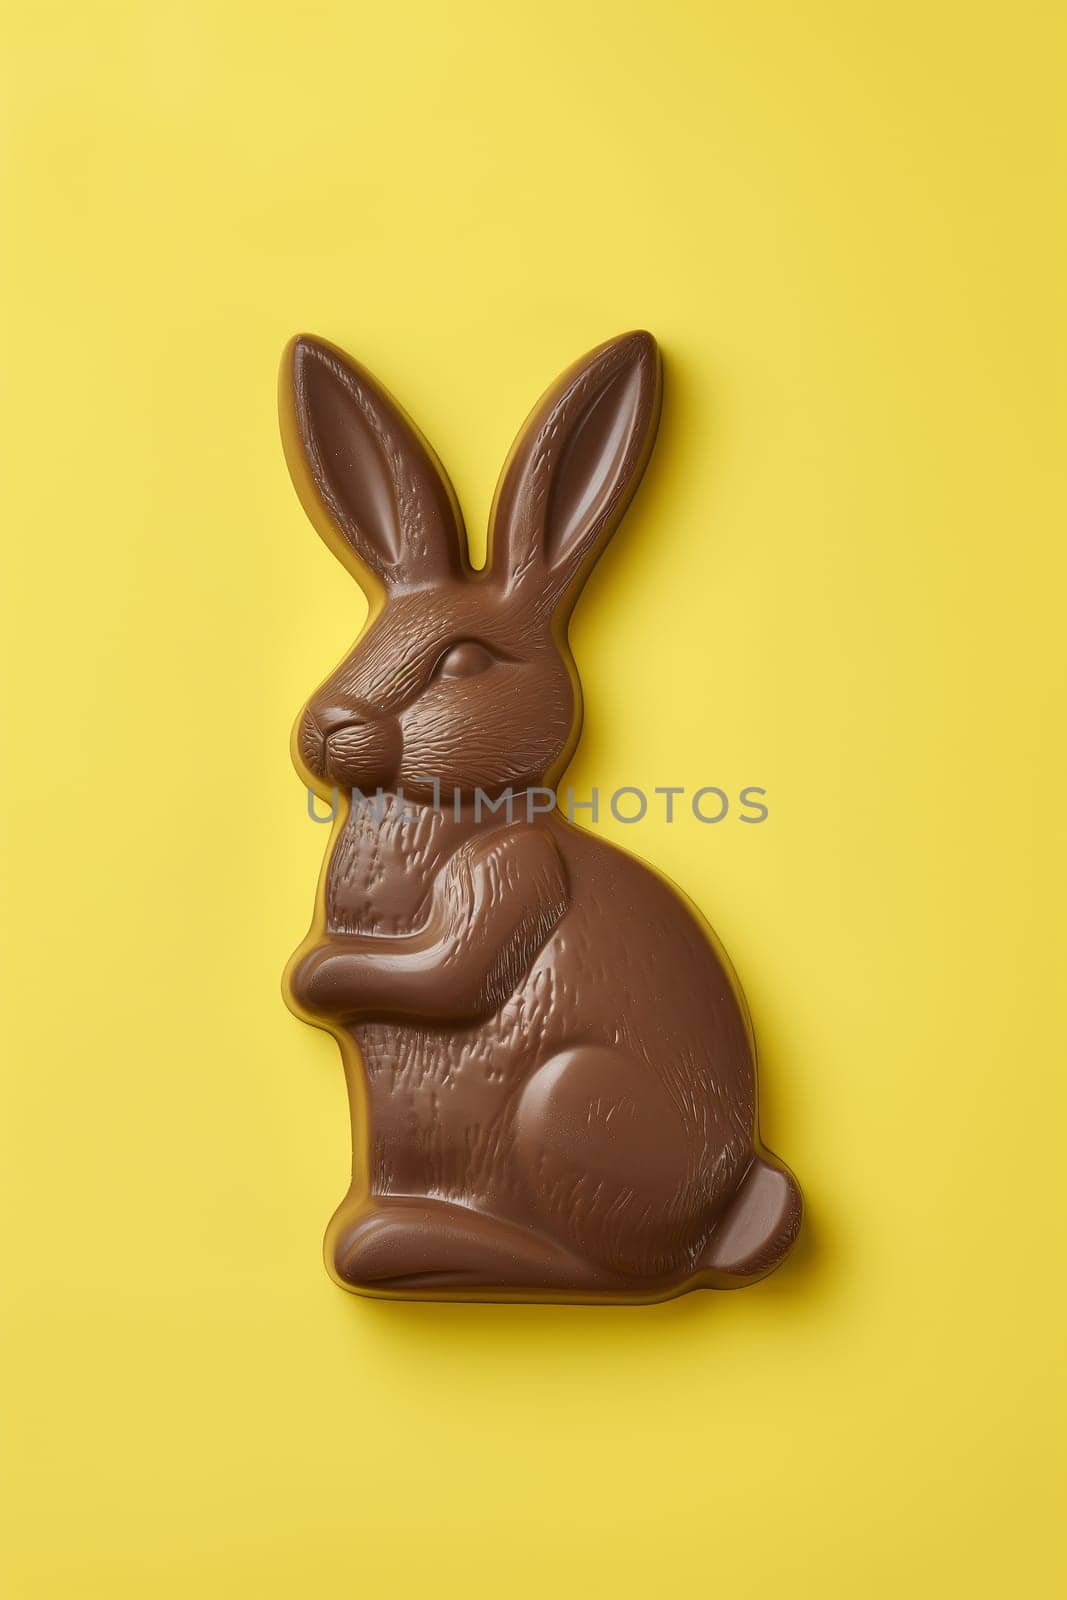 Chocolate Bunny on Bright Yellow Background by chrisroll